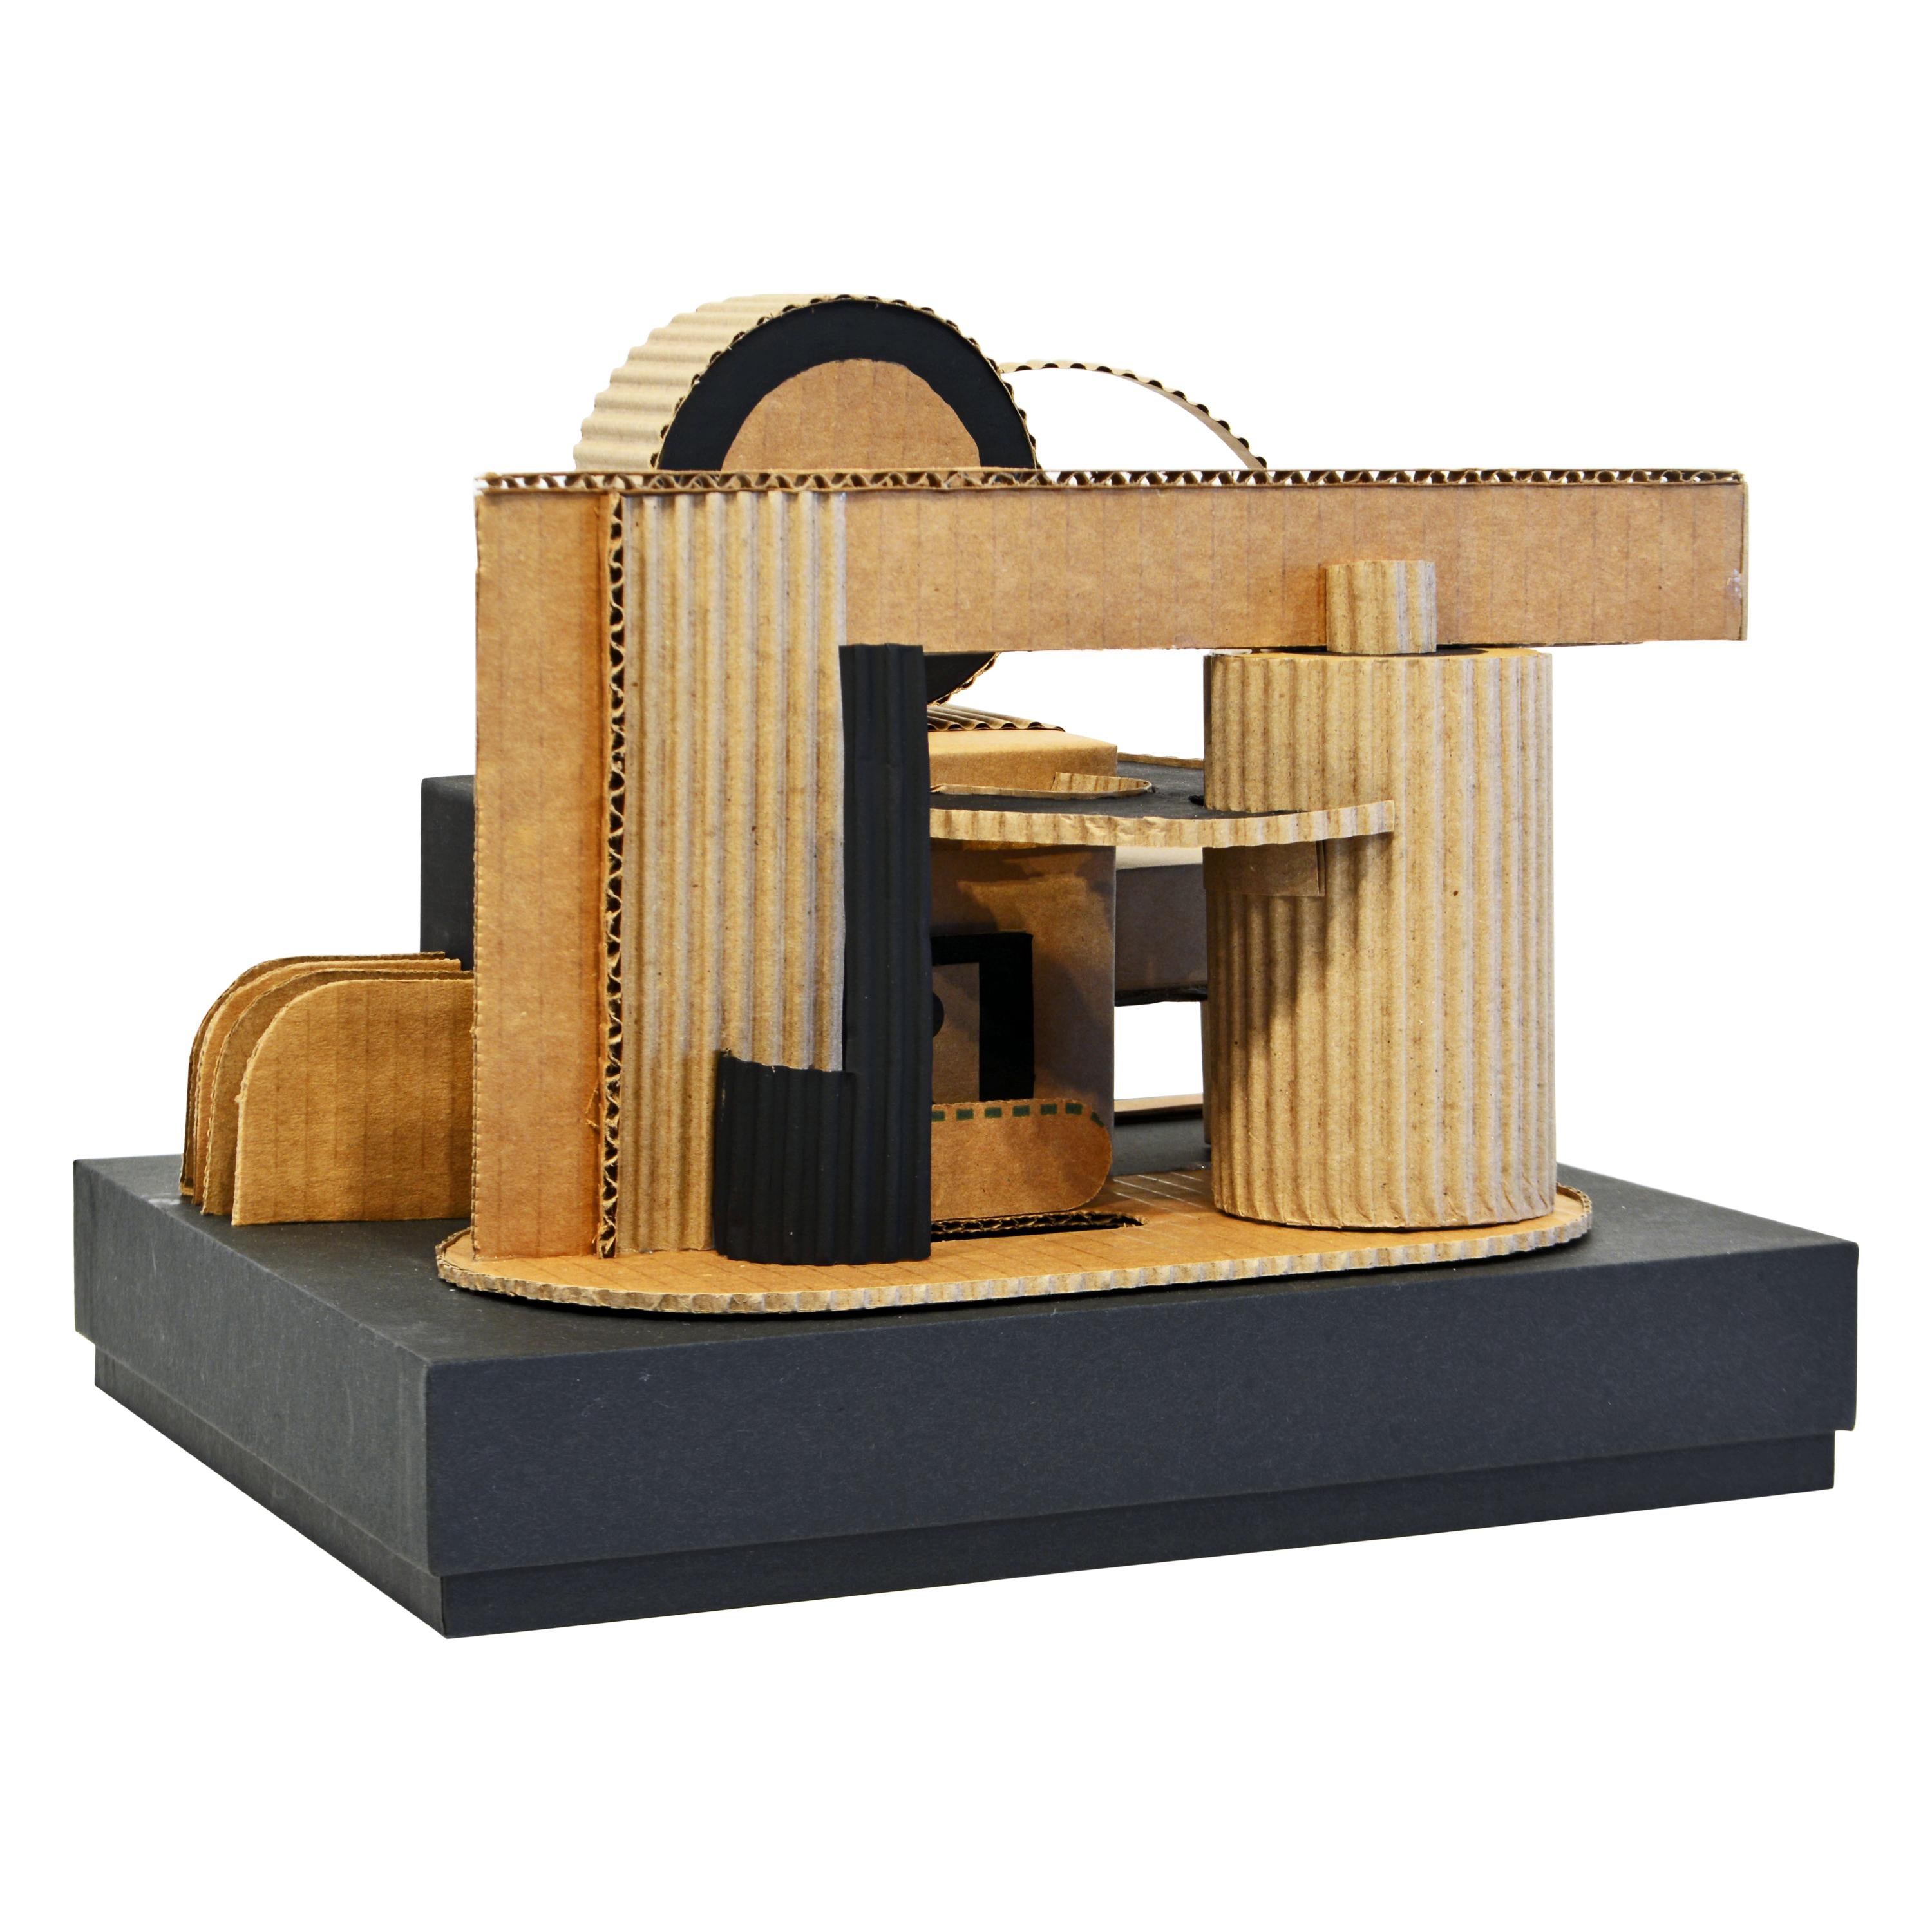 Cubist Bauhaus Style Architectural Cardboard Table Sculpture by Virgil Greca For Sale